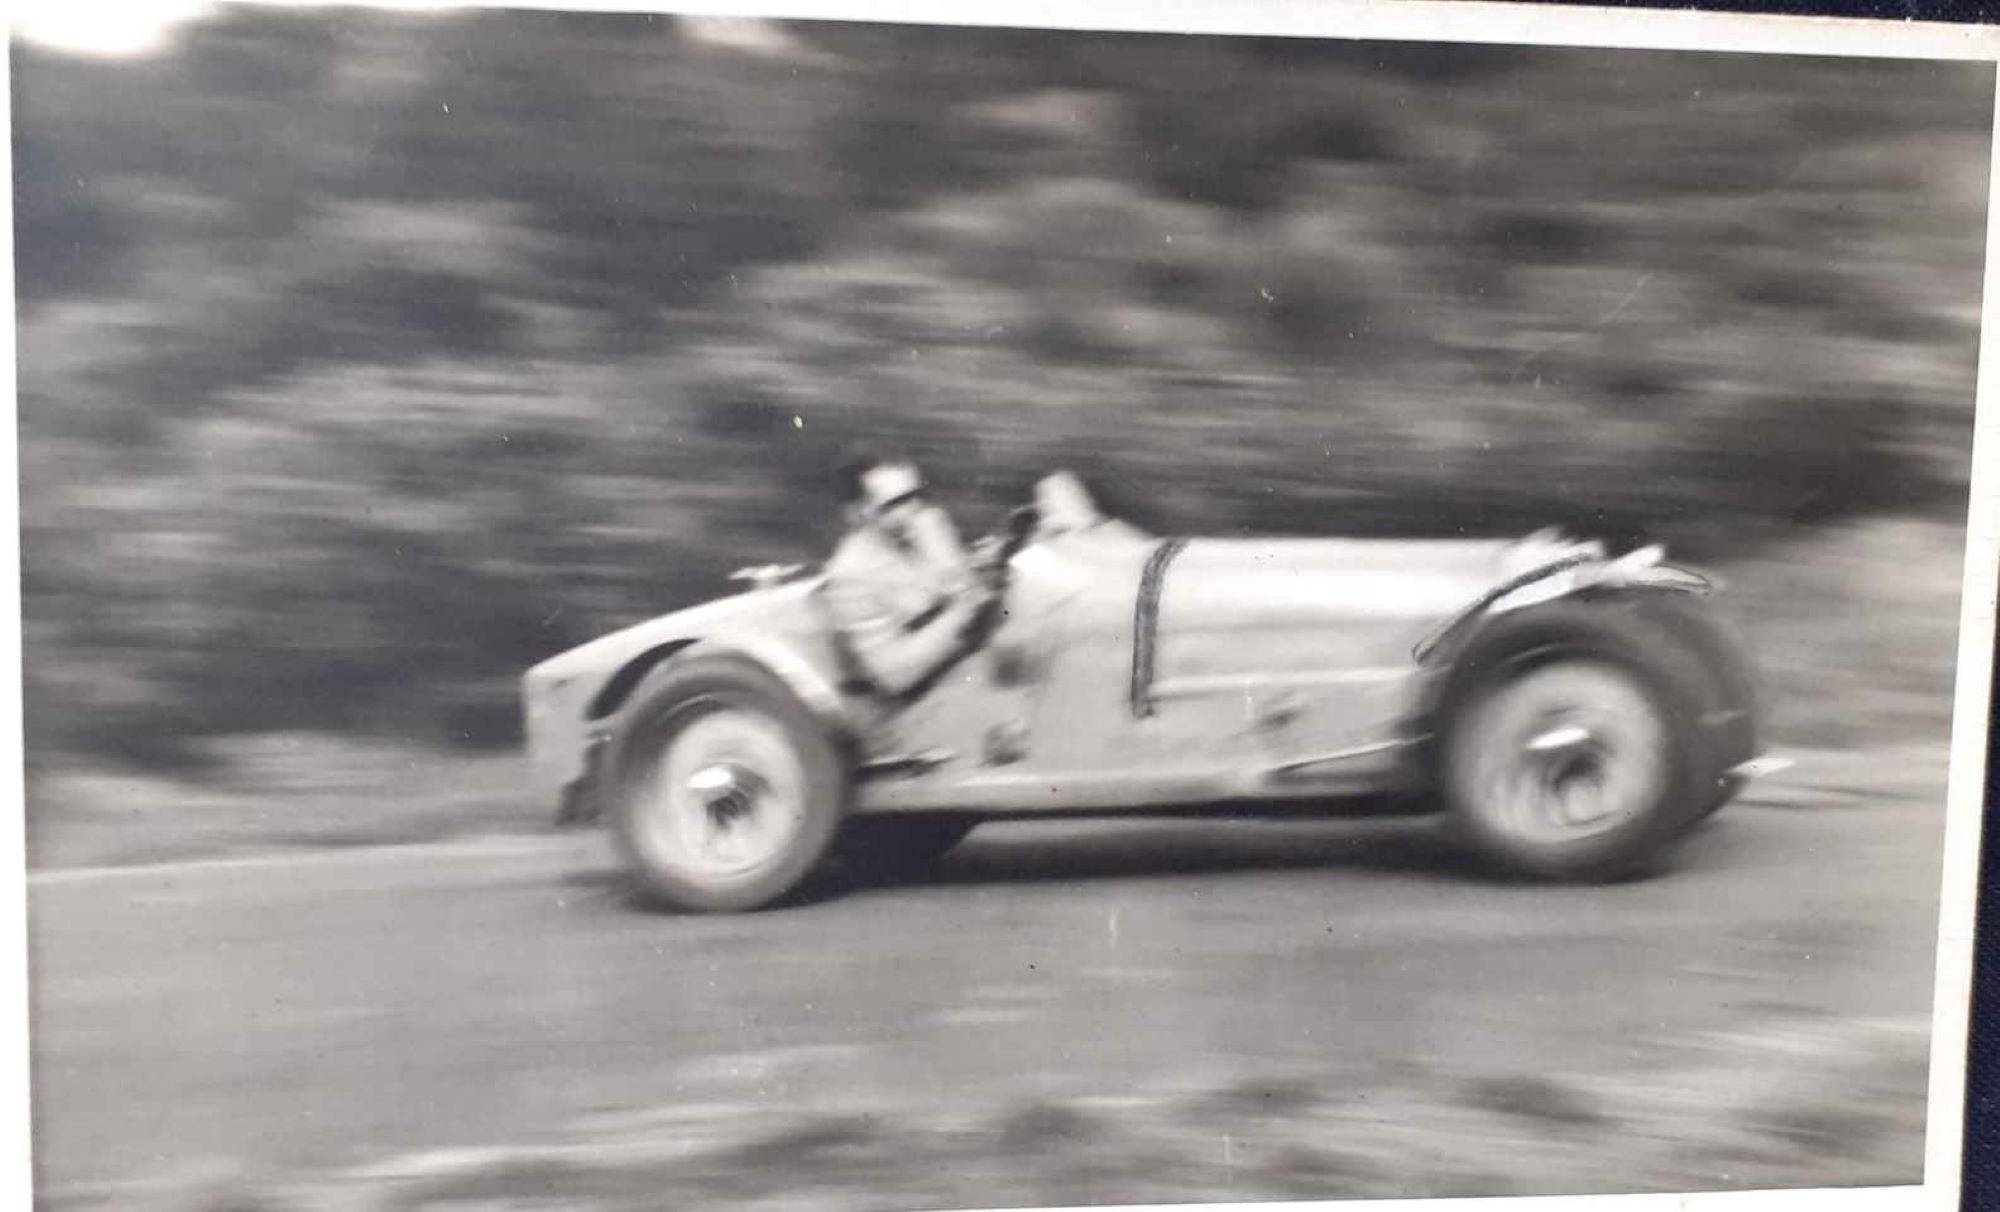 Name:  NSCC 1950 #0116 Bugatti T35 at speed - light colour 1950's - image Graeme Wells arch Anthony Wel.jpg
Views: 270
Size:  158.1 KB